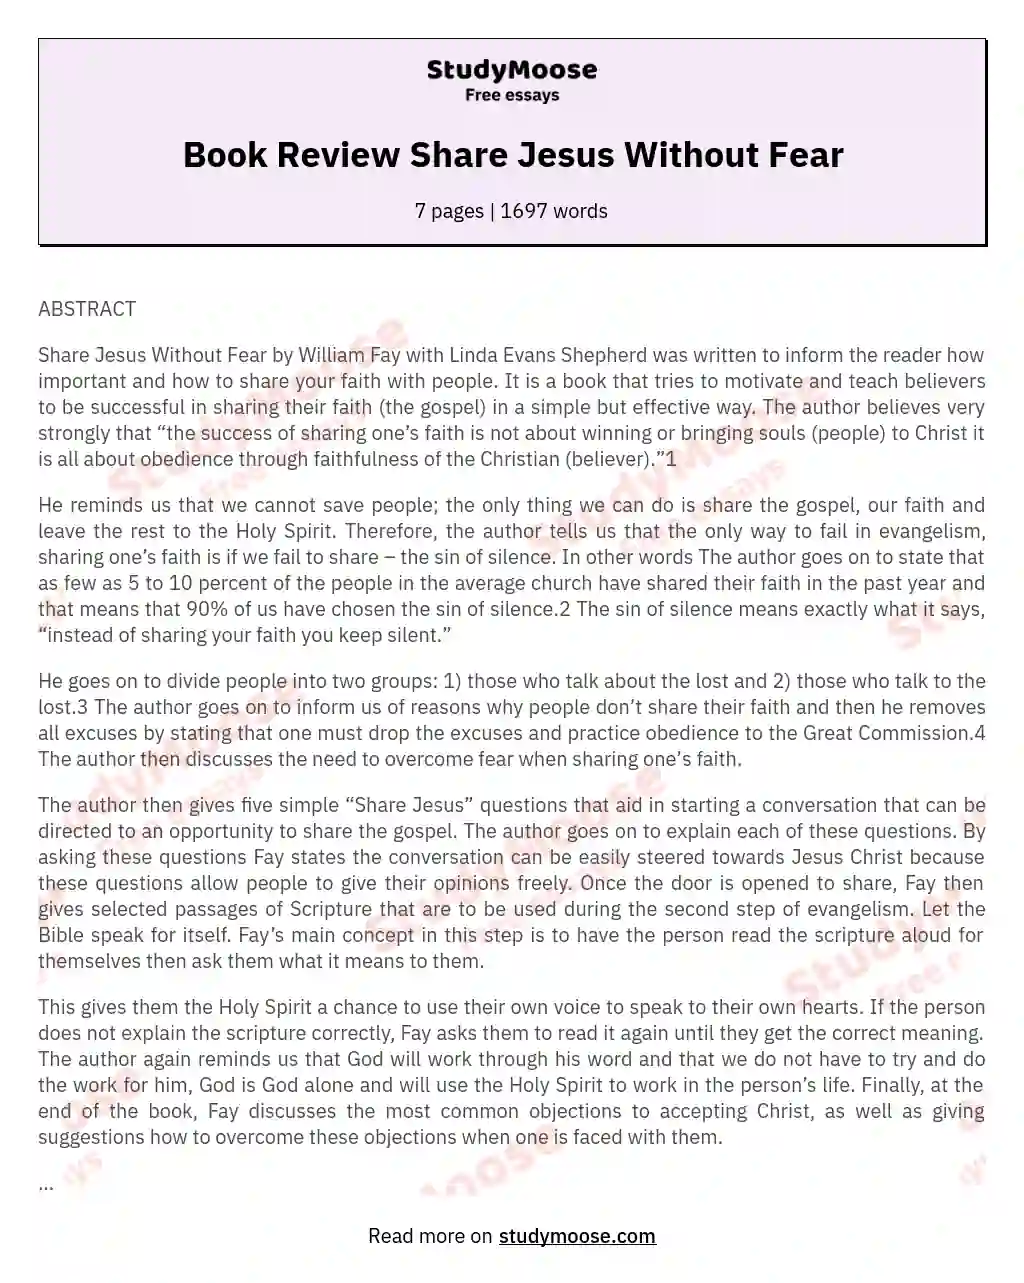 Book Review Share Jesus Without Fear essay